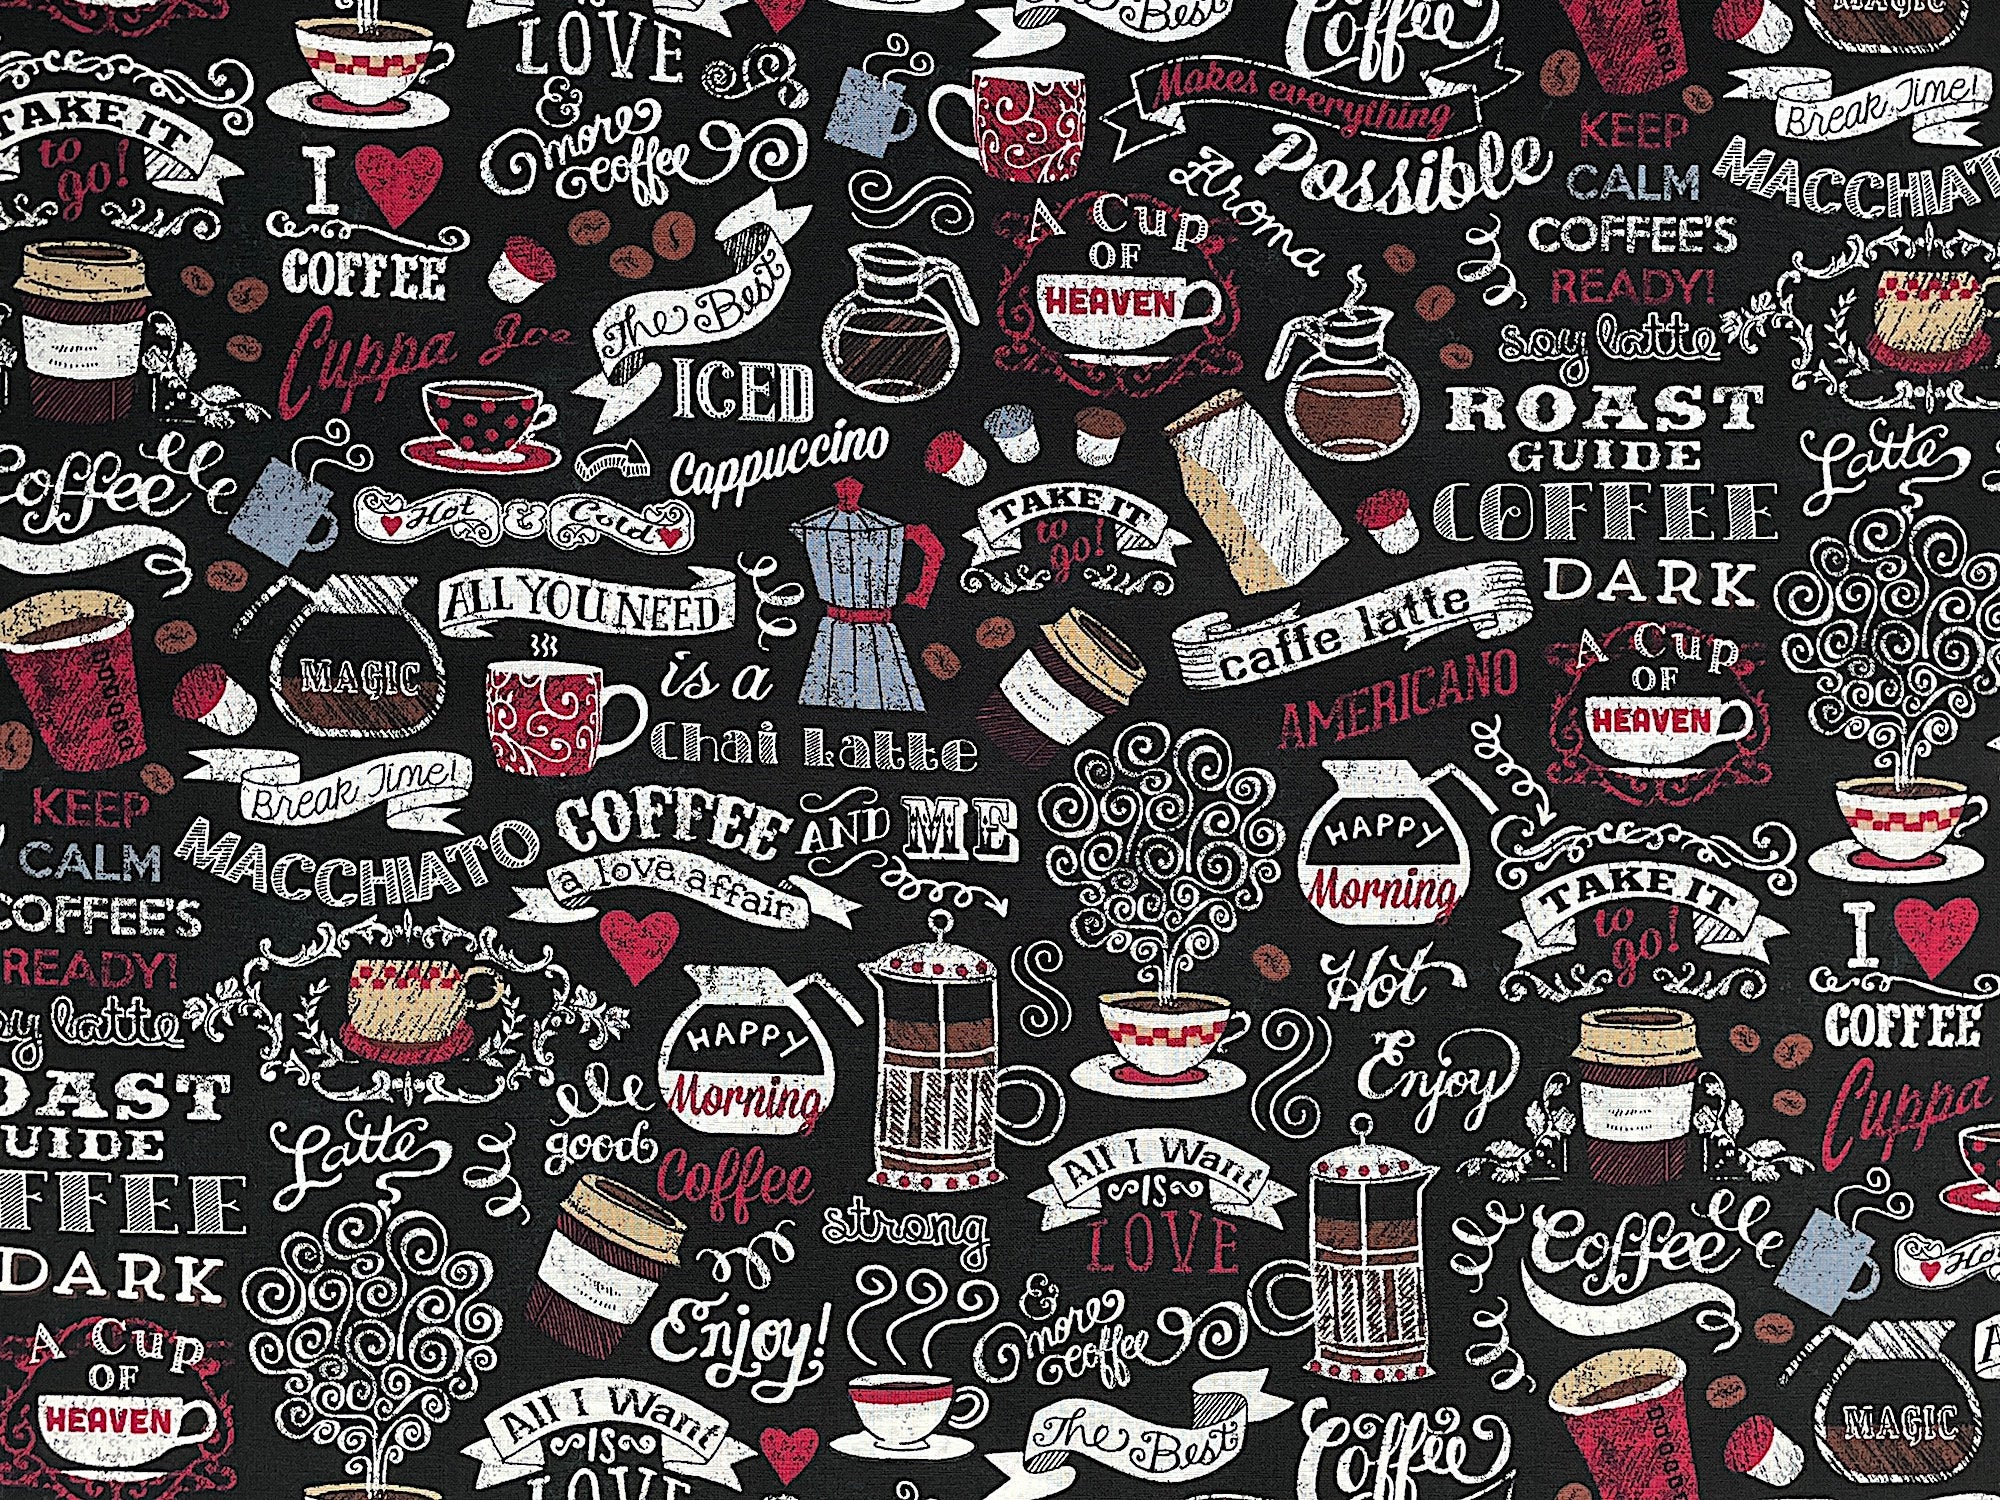 Coffee sayings such as happy morning, roast, latte, strong, americano and more are printed on this fabric. You will also find coffee cups and coffee pots on this black fabric.